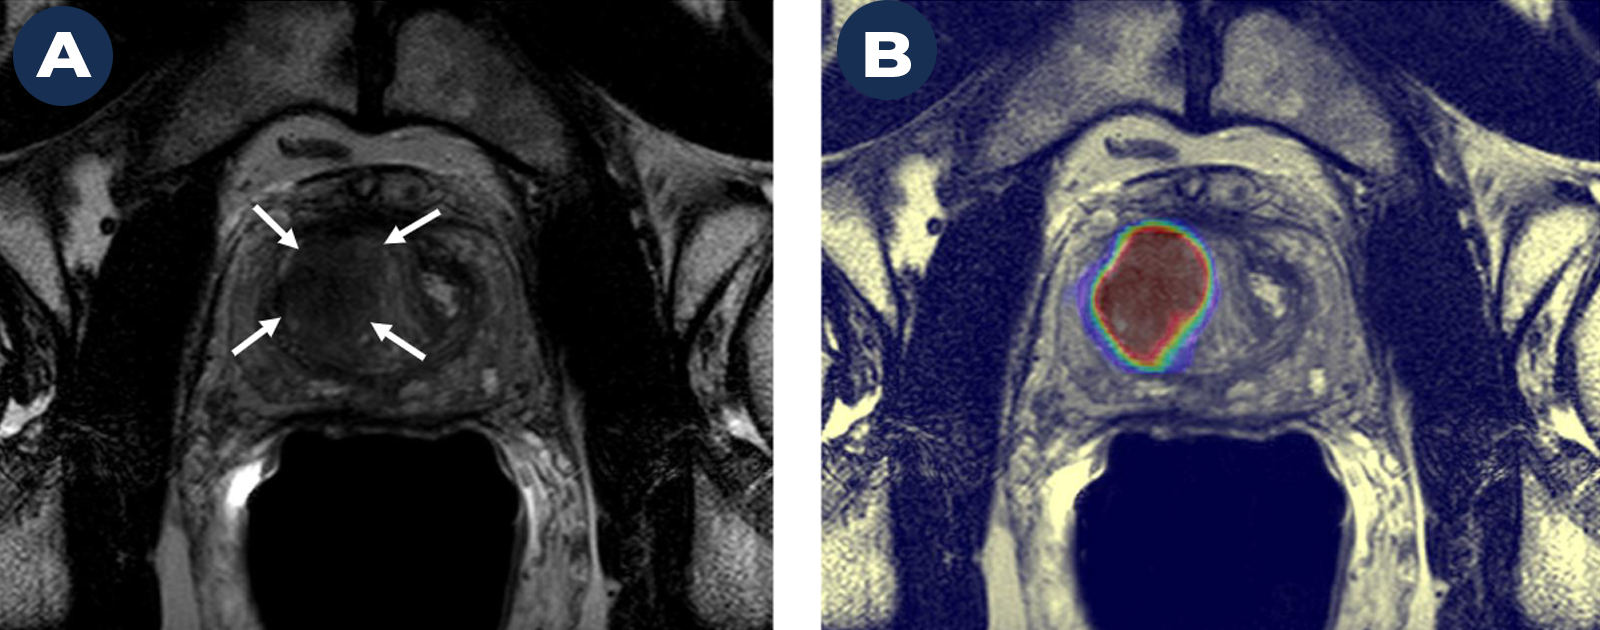 A Magnetic Resonance Image (MRI) on the left (A) shows a suspicious cancer lesion (dark mass marked by arrows). A deep learning-based AI algorithm helps further define this lesion as prostate cancer (B). The lesion in B is displayed as a large red mass, outlined in blue and green. The lesion in B is much larger than the one shown in A, indicating AI helped to better define the extent of the cancer than MRI alone. 